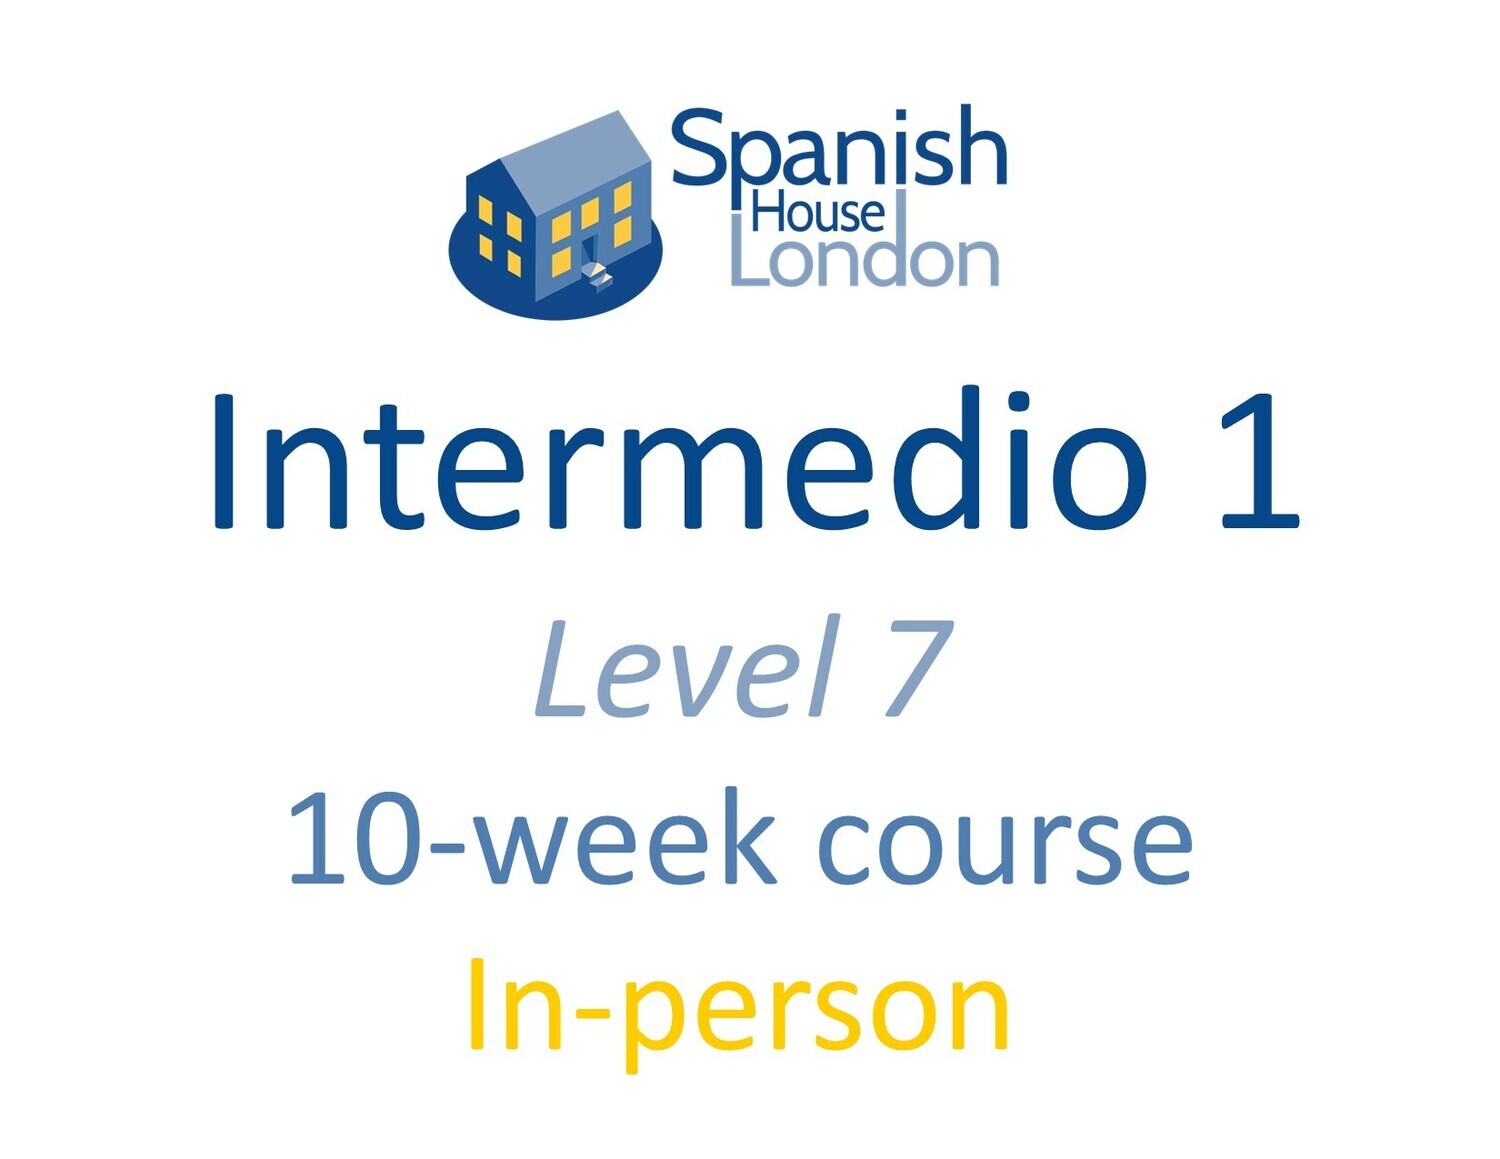 Intermedio 1 Course starting on 13th June at 7.30pm in Clapham North